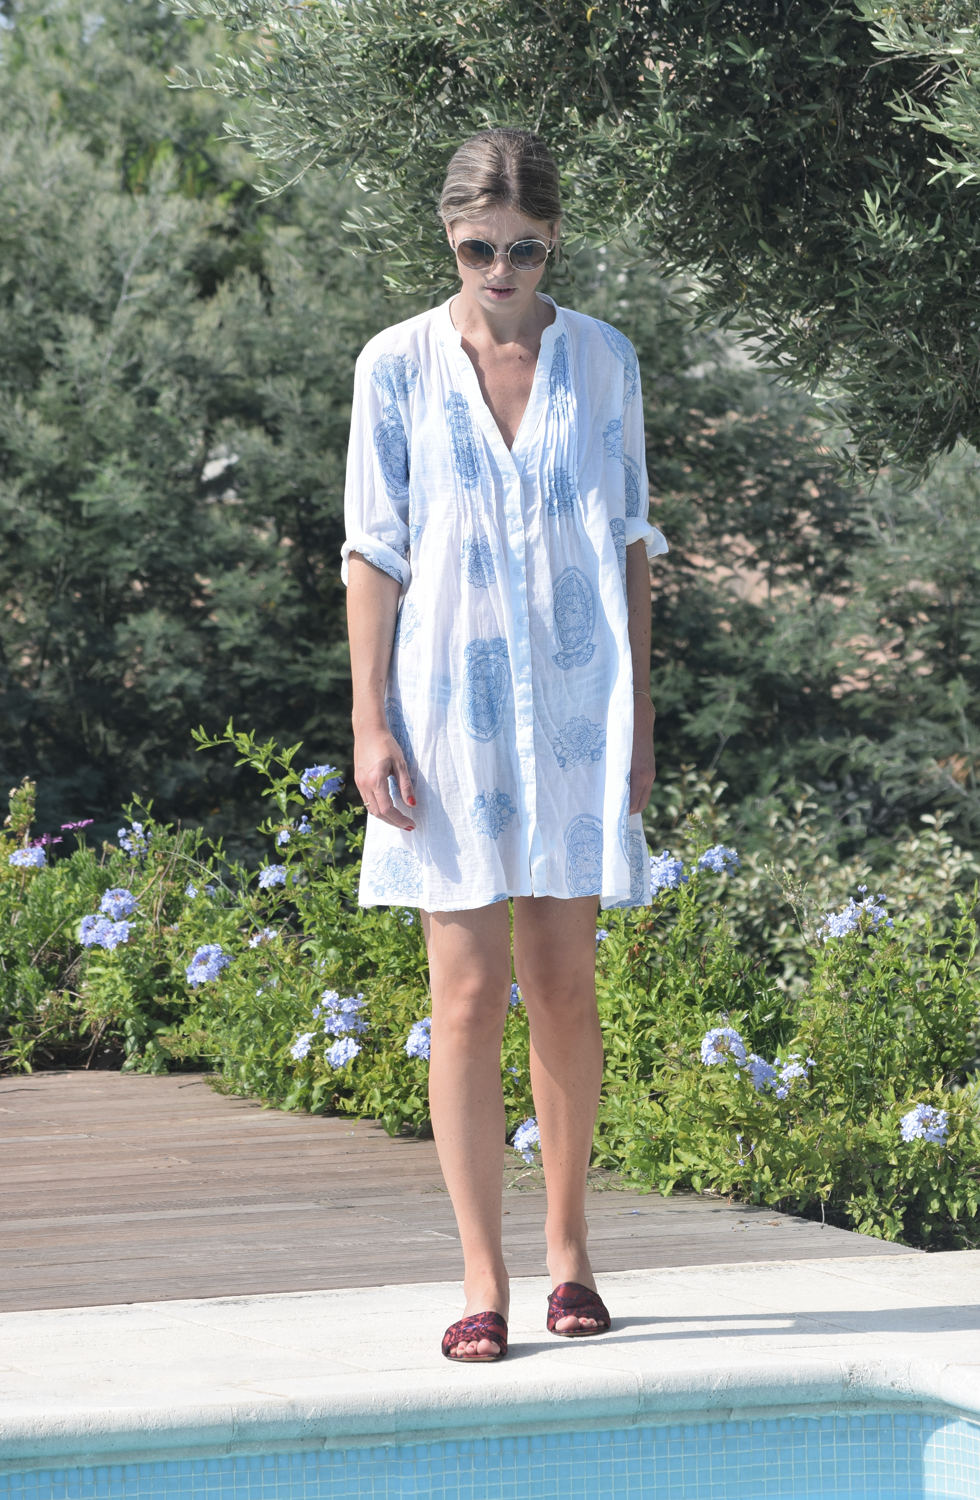 Outfit of the day, Chloé, Positano, Dries Van Noten, ootd, pool, fashion, blogger, style, summer